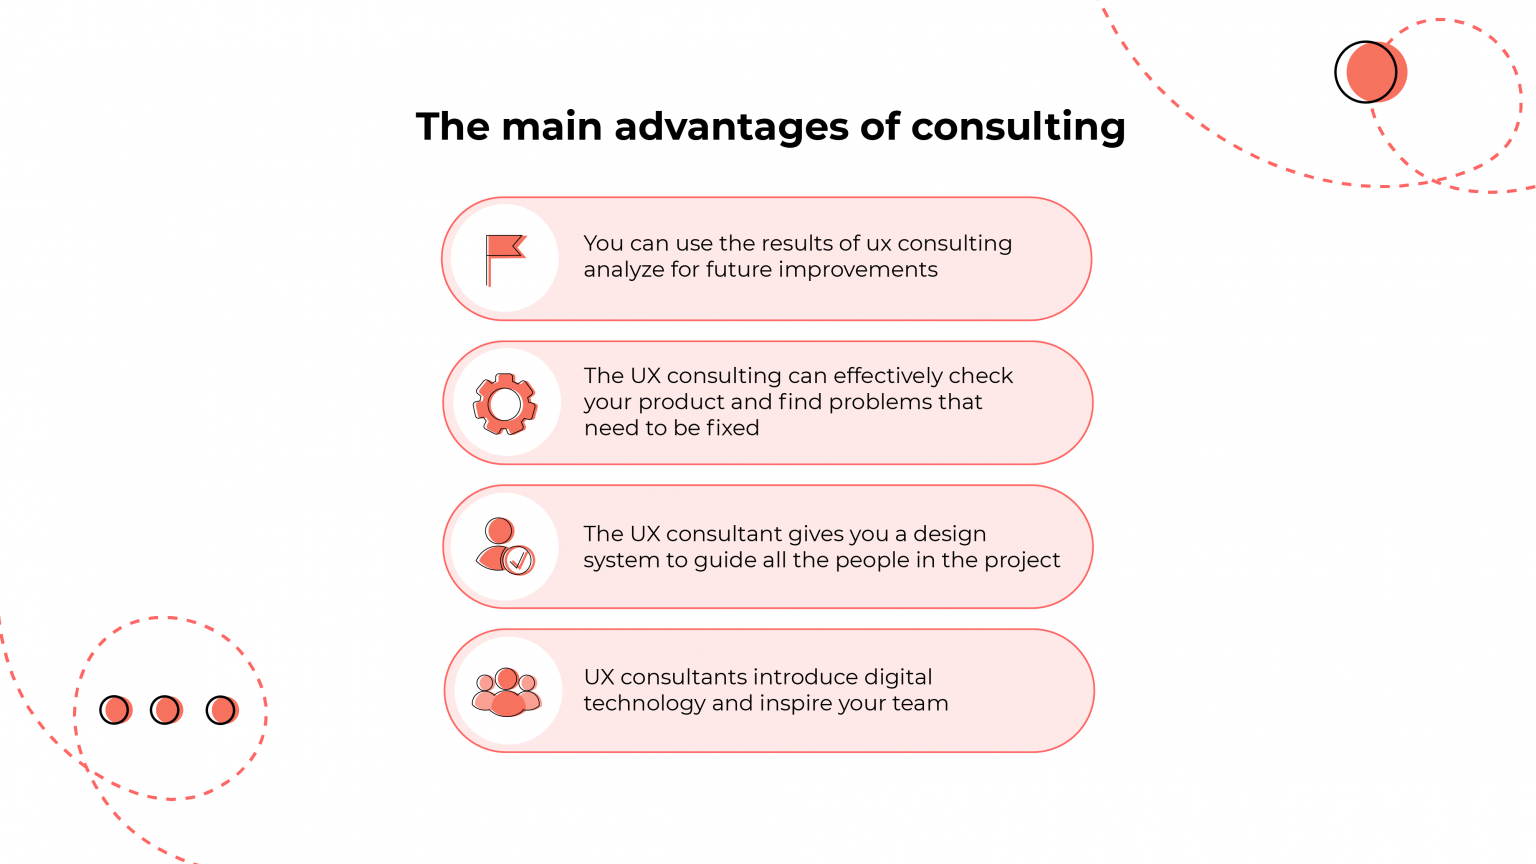 The main advantages of UX consulting 